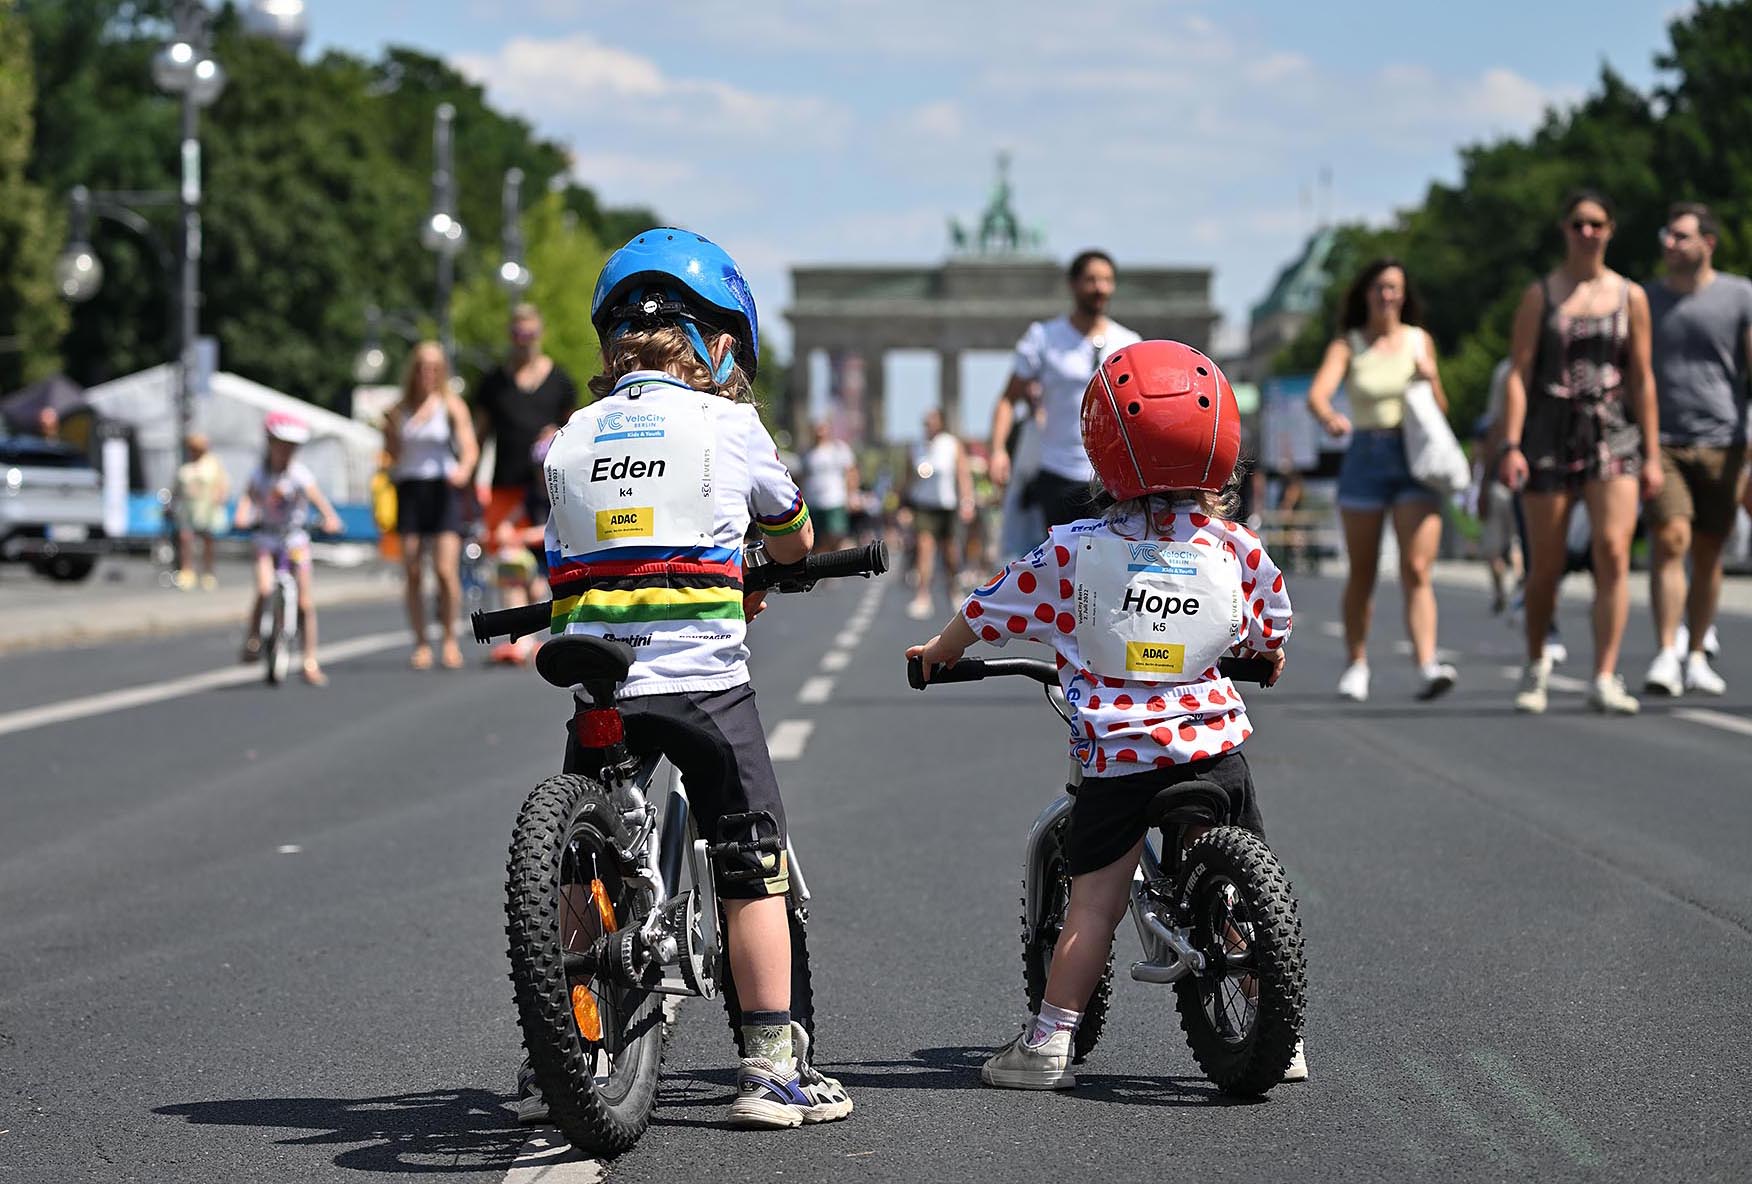 VeloCity Berlin photos (2022): Two children on bikes in the starting area © Petko Beier / SCC EVENTS